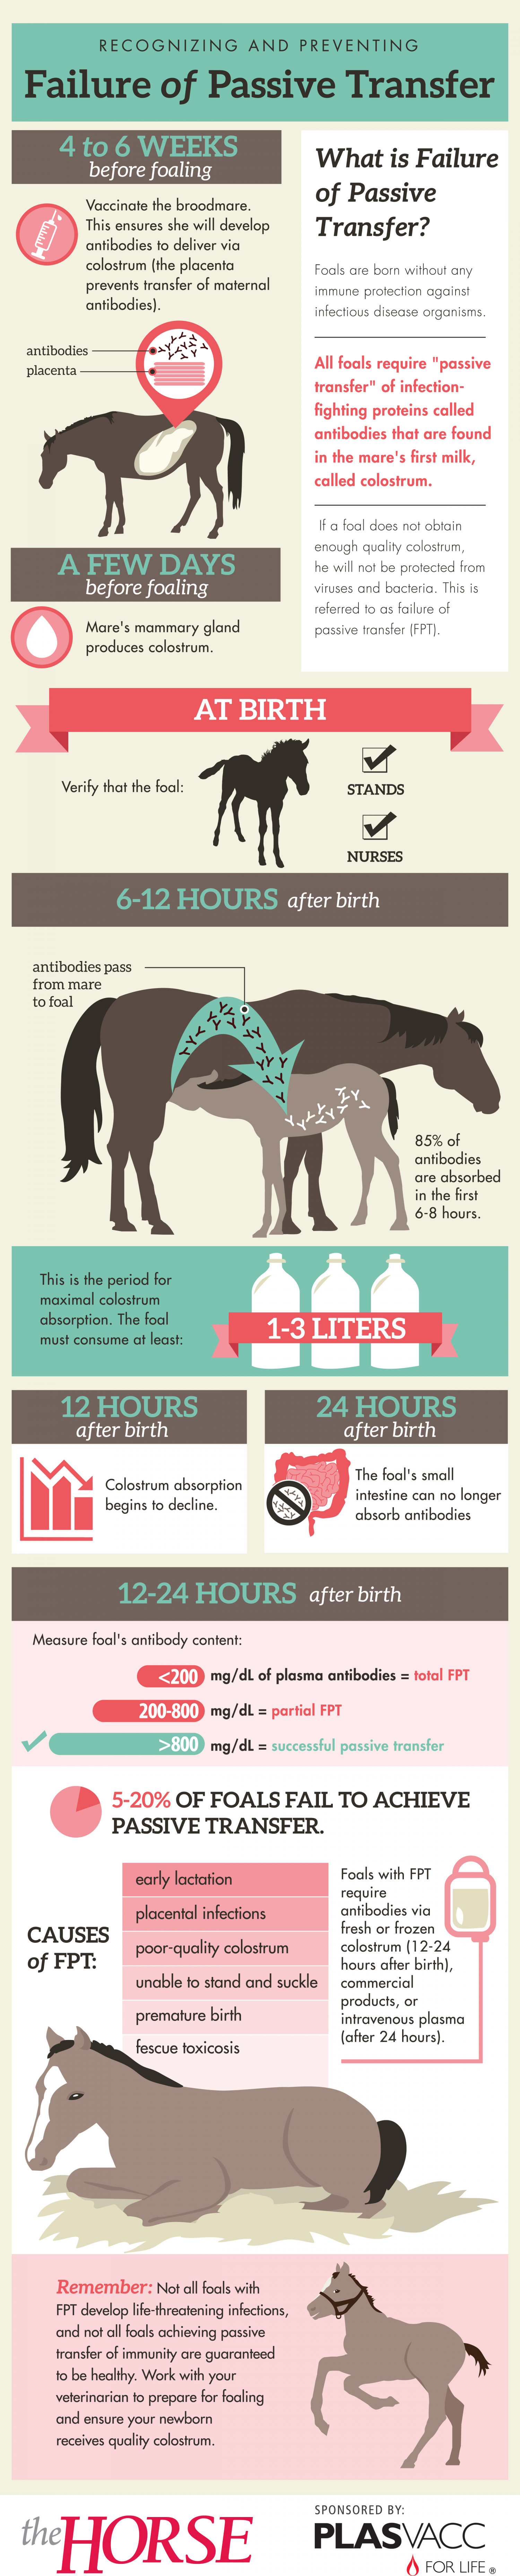 Recognizing and Preventing Failure of Passive Transfer in Horses Infographic